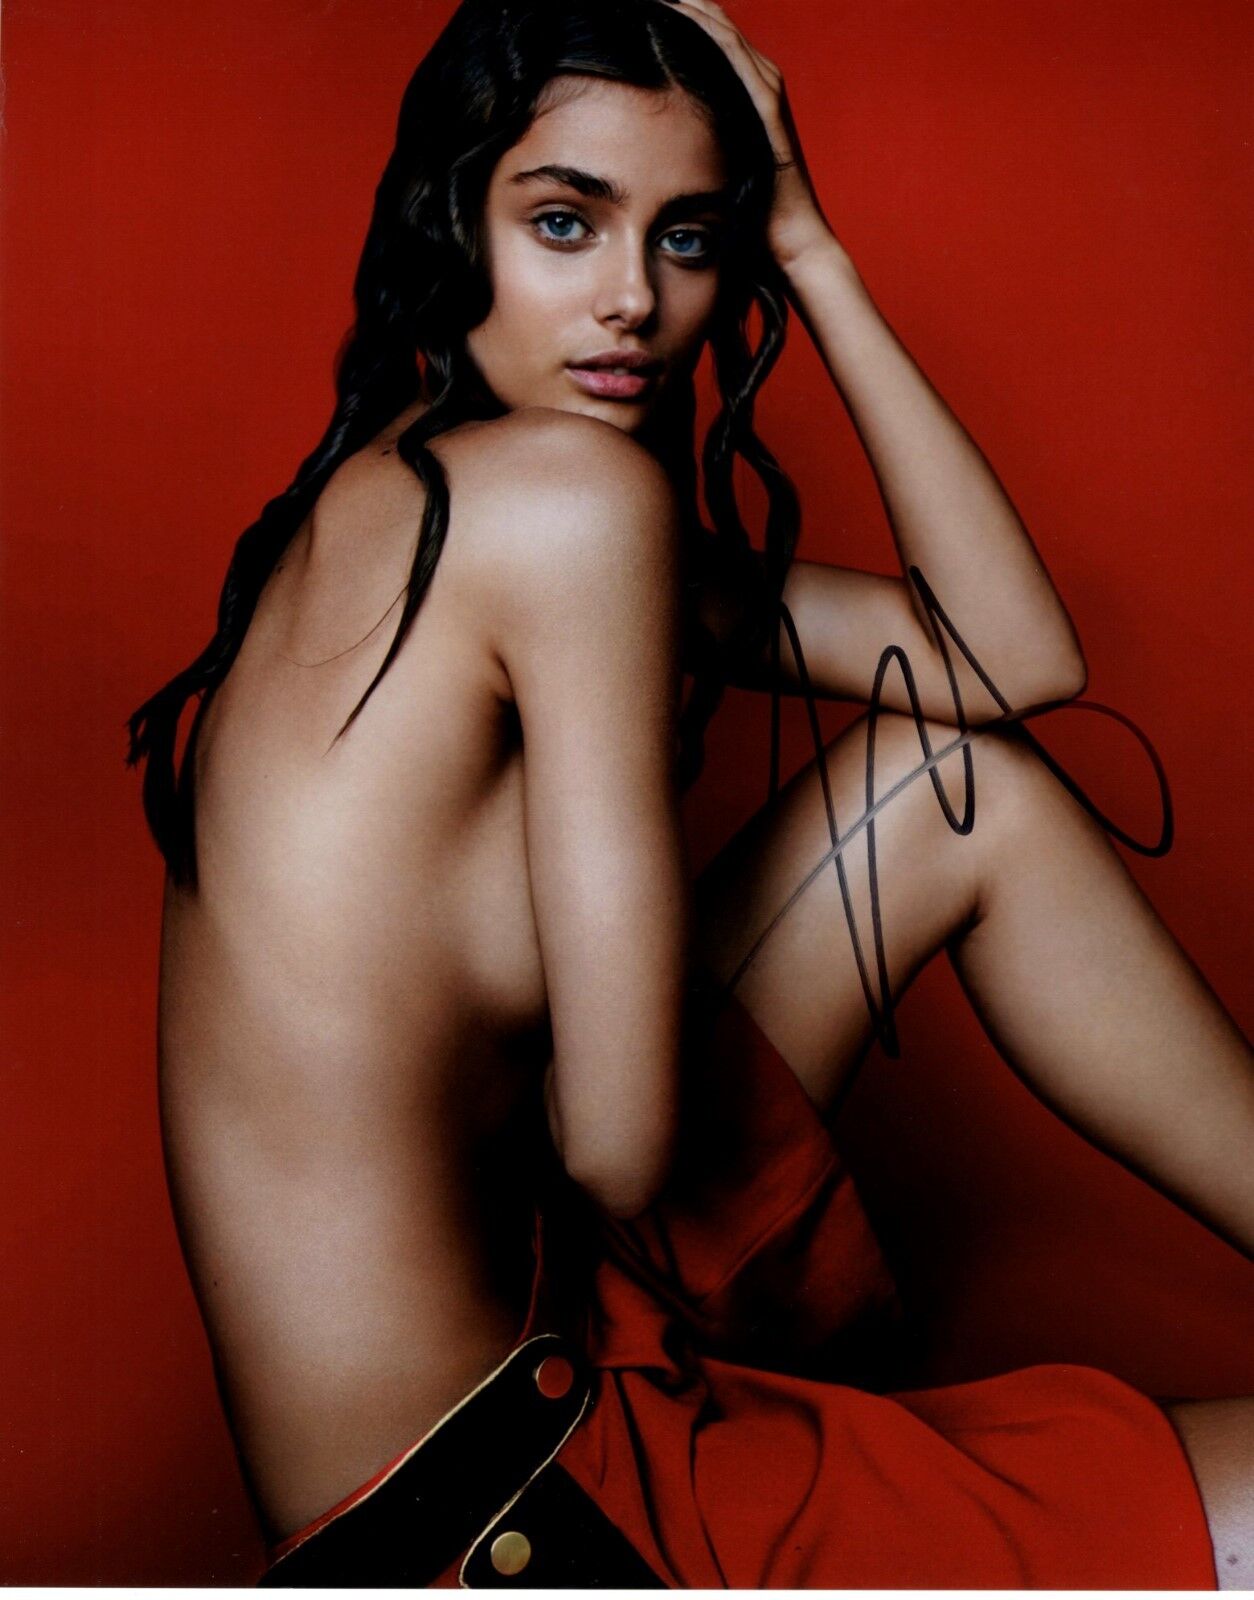 Taylor Hill Nude Covered Sexy Model Hand Signed 8x10 Photo Poster painting Autographed w/COA